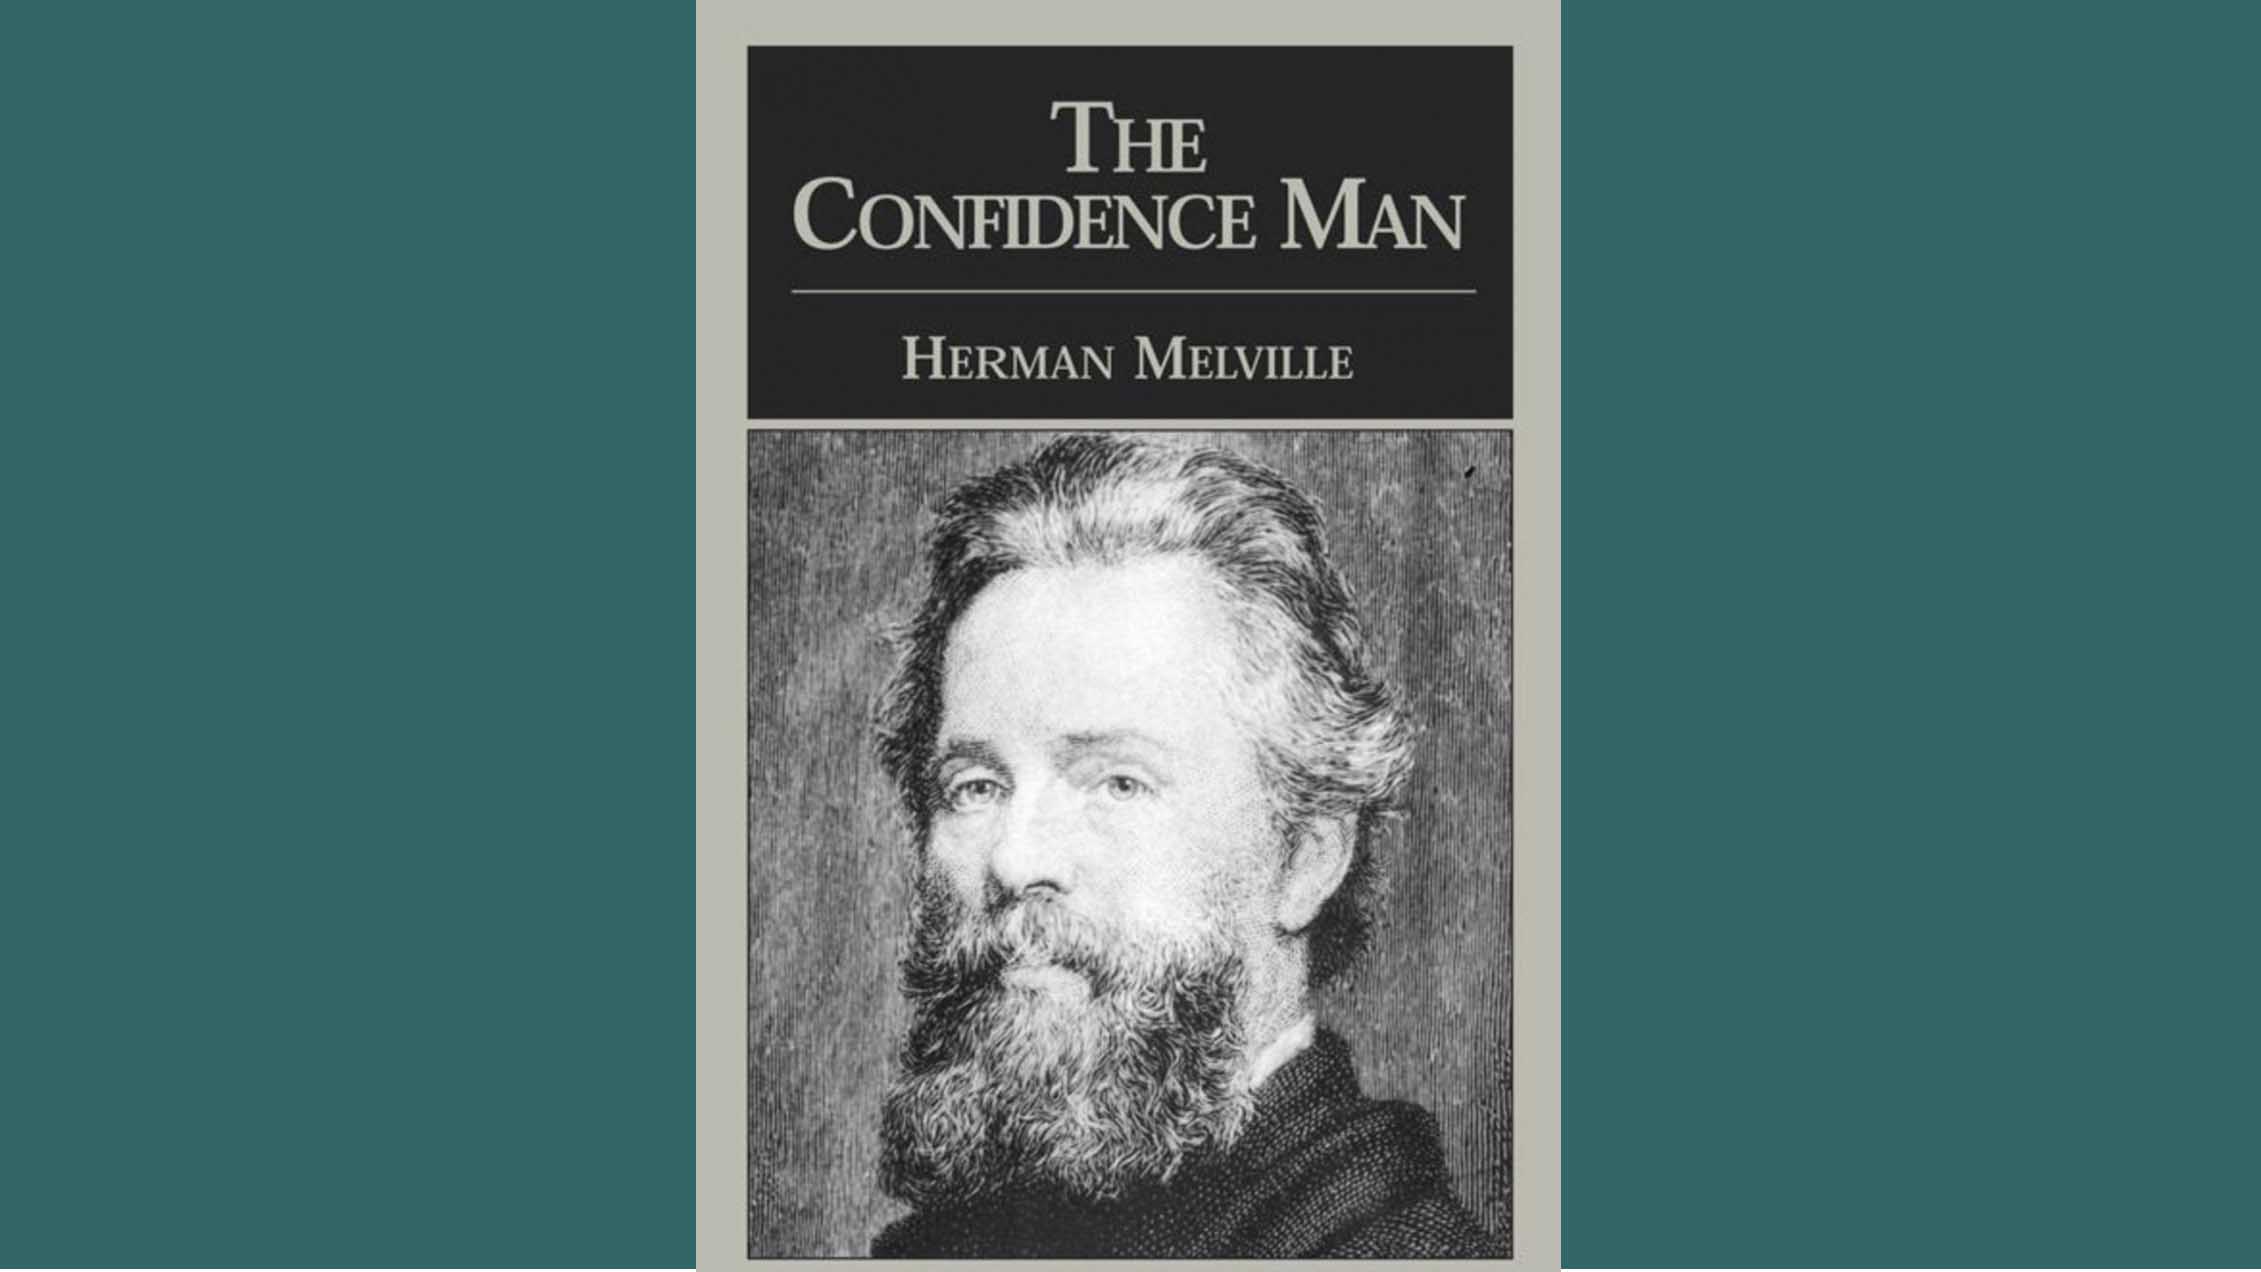 what was the last work of herman melville published in his lifetime